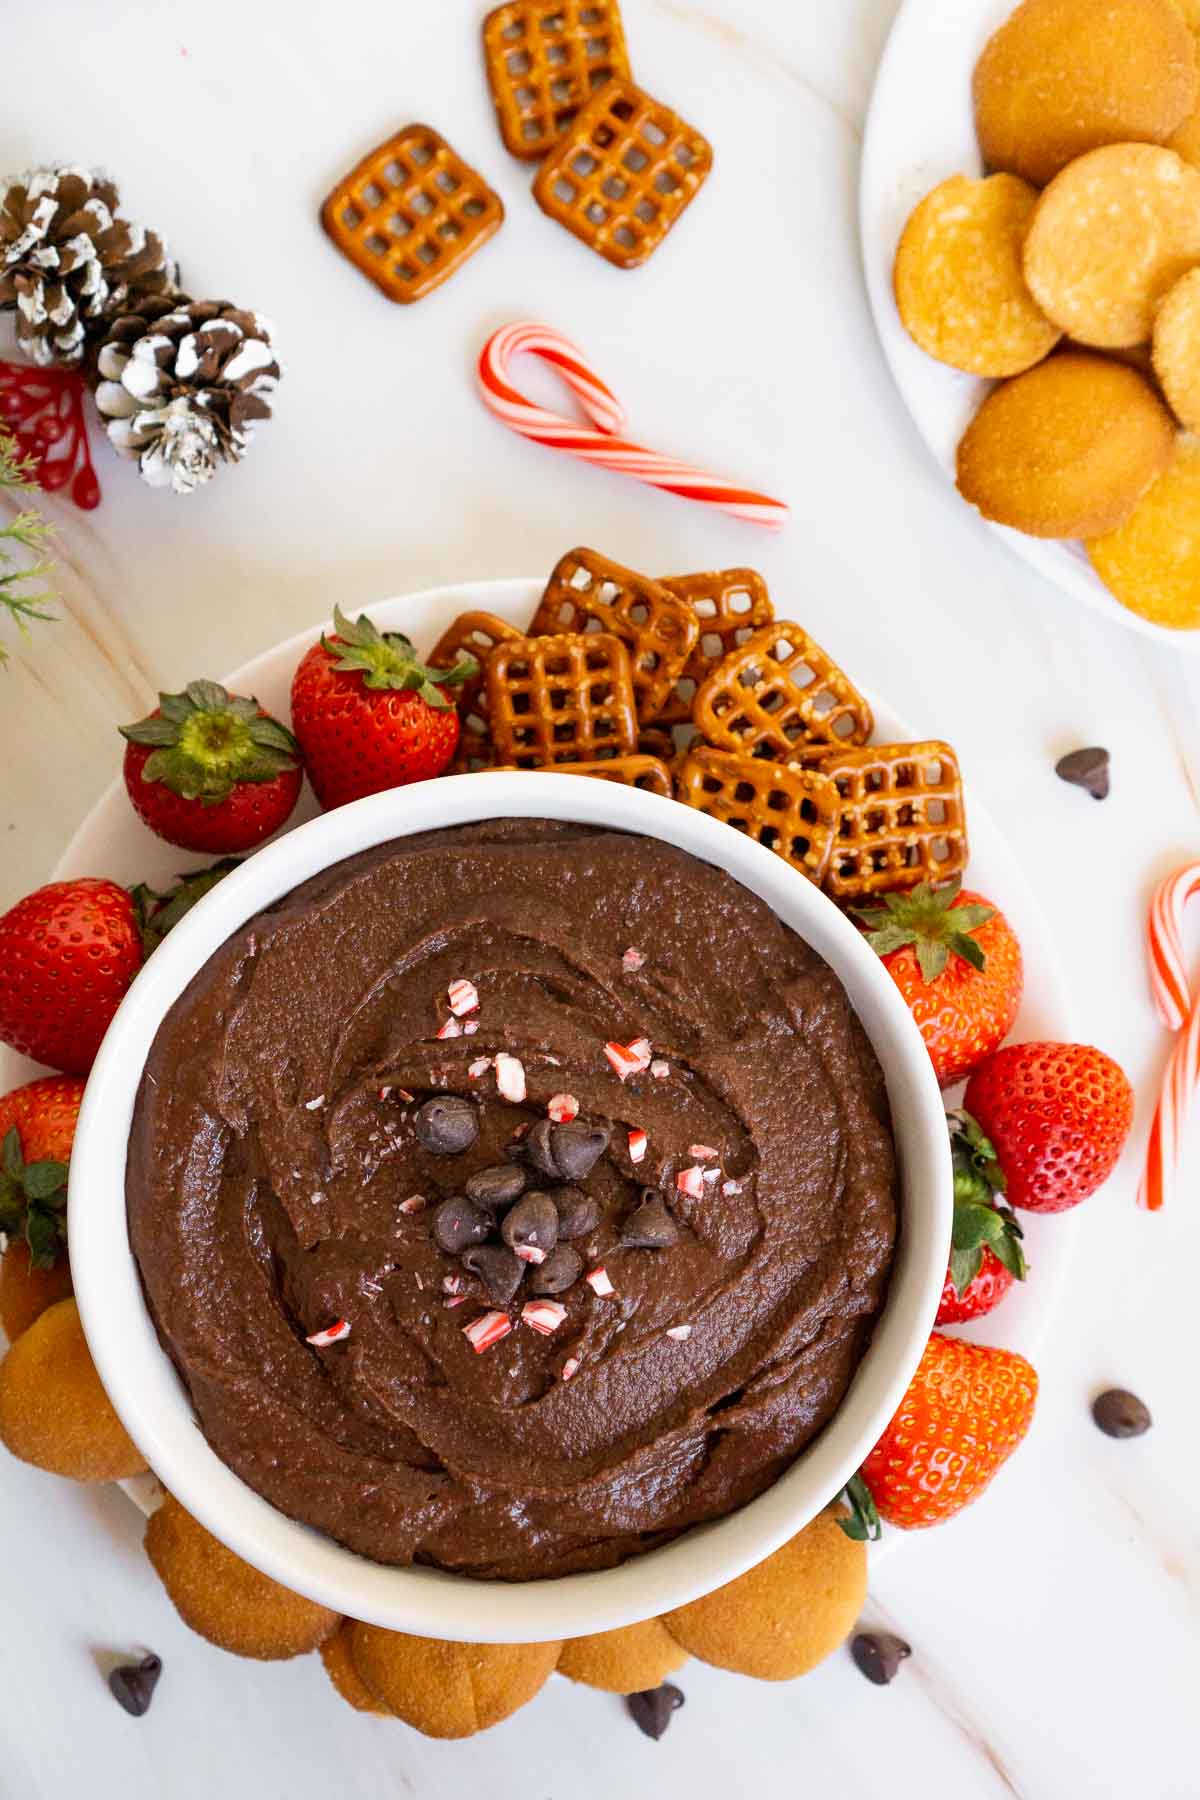 Bowl of mint chocolate hummus garnished with crushed candy canes.